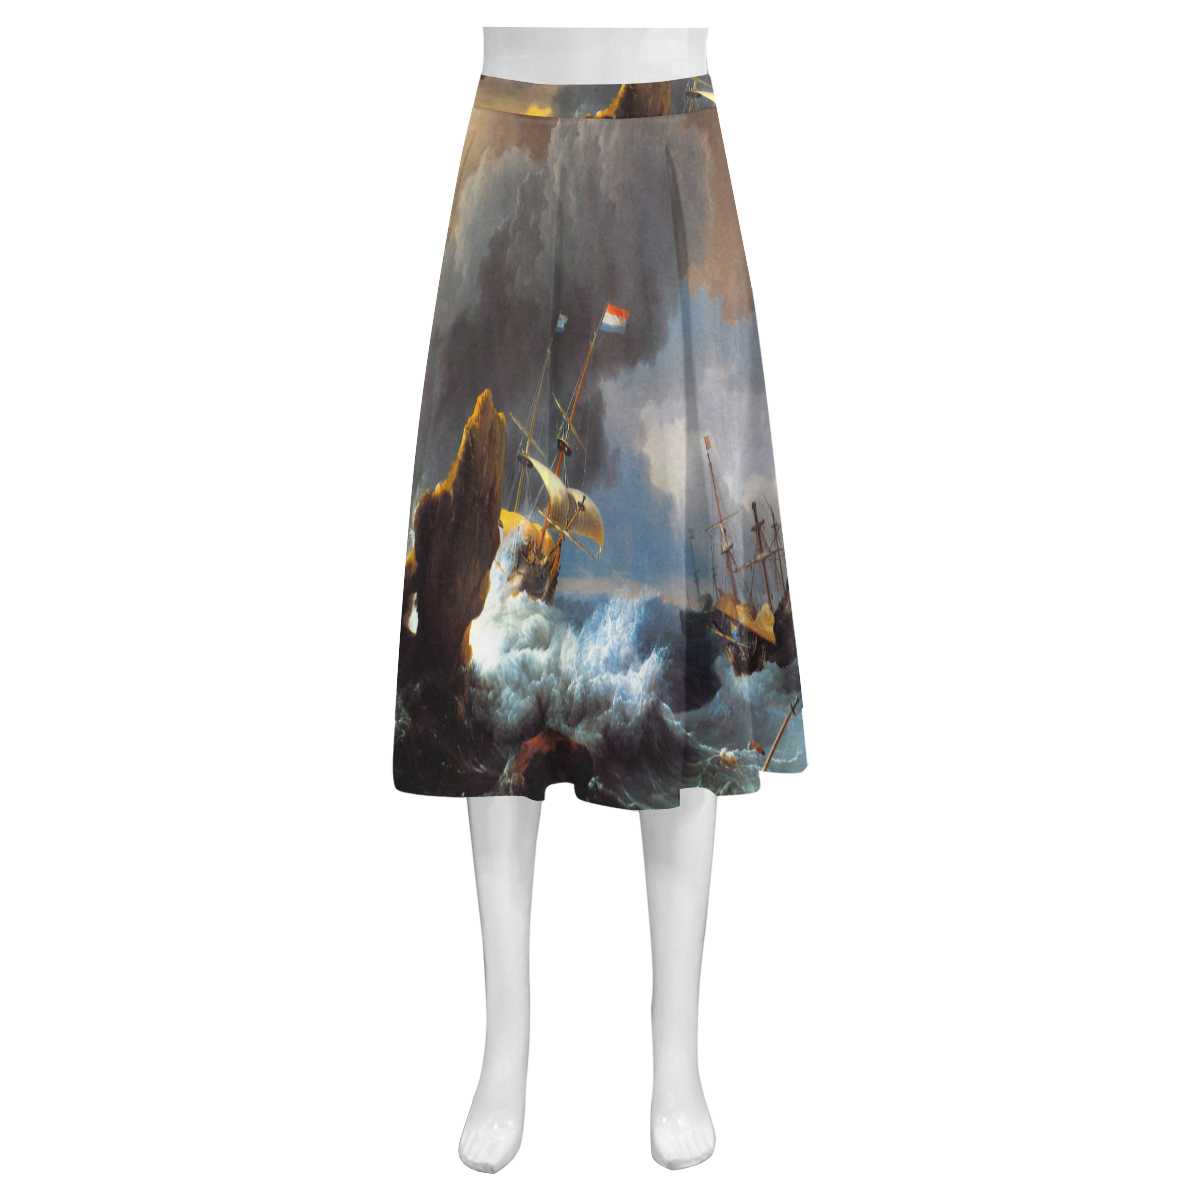 Ships in Distress off a Rocky Coast Mnemosyne Women's Crepe Skirt (Model D16)